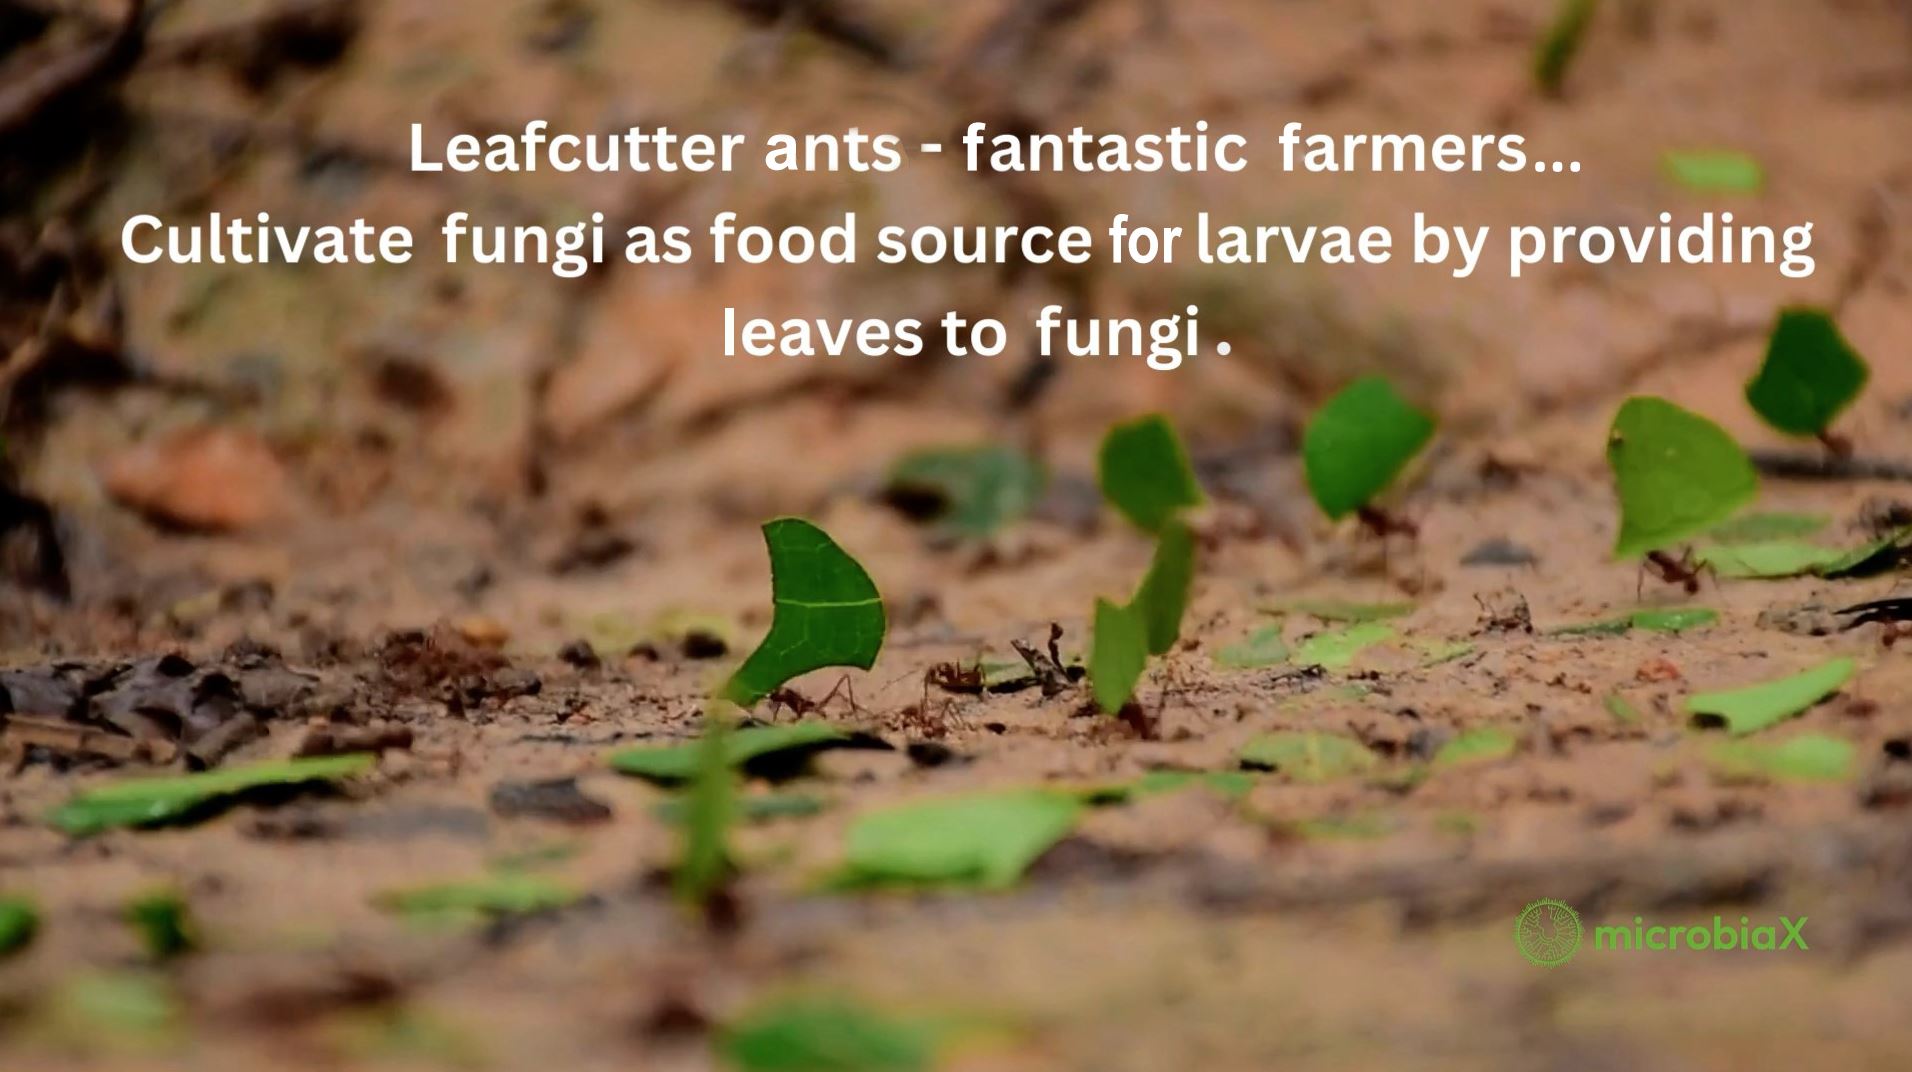 Leafcutter ants. Photo from a video clip by Gilmer Diaz Estela, in public domain.